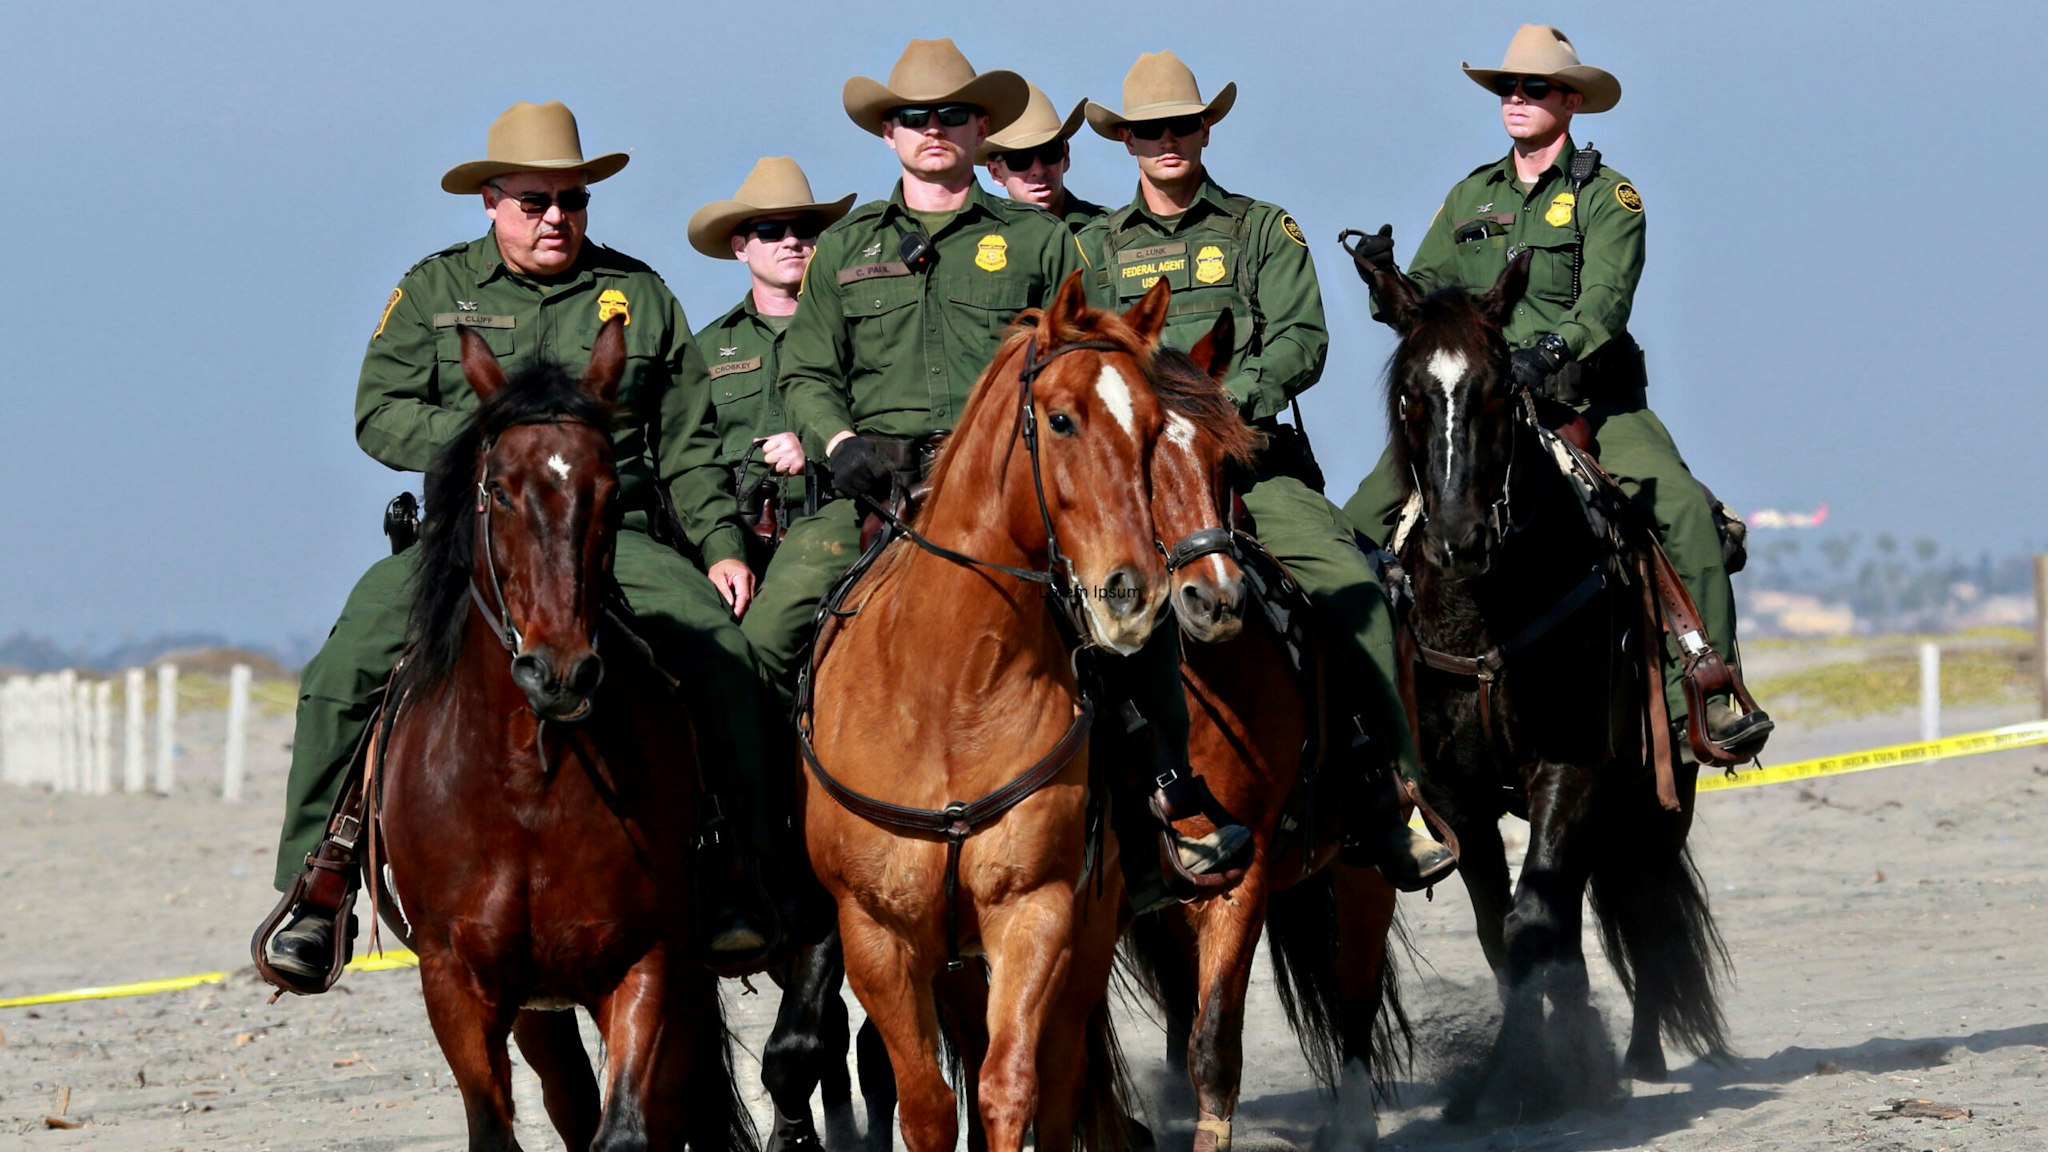 Border Patrol agents ride horses along the beach at Borderfield State Park in San Ysidro, California on November 20, 2018. - A US federal judge temporarily blocked Donald Trump's administration from denying asylum to people who enter the country illegally, prompting the president to allege Tuesday that the court was biased against him.